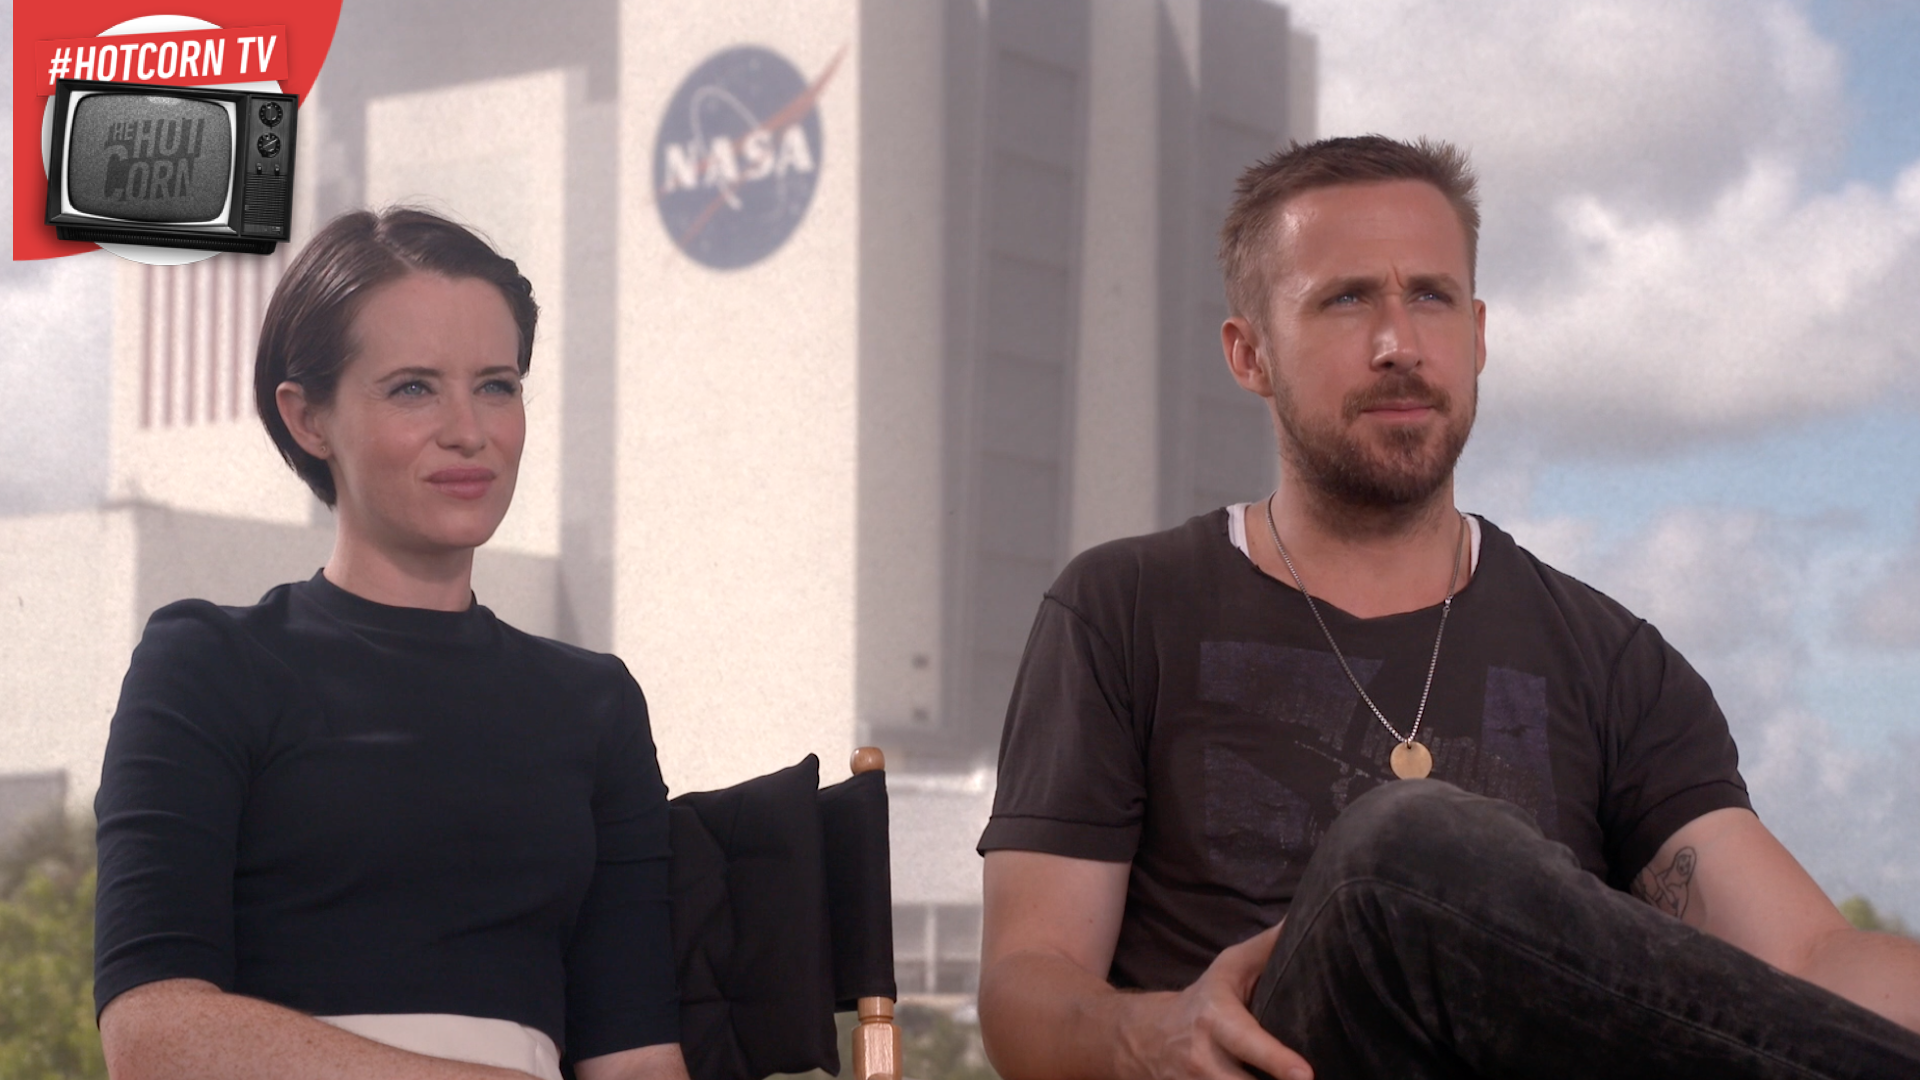 HOT CORN TV - Ryan Gosling and Claire Foy at Kennedy Space Center – The HotCorn